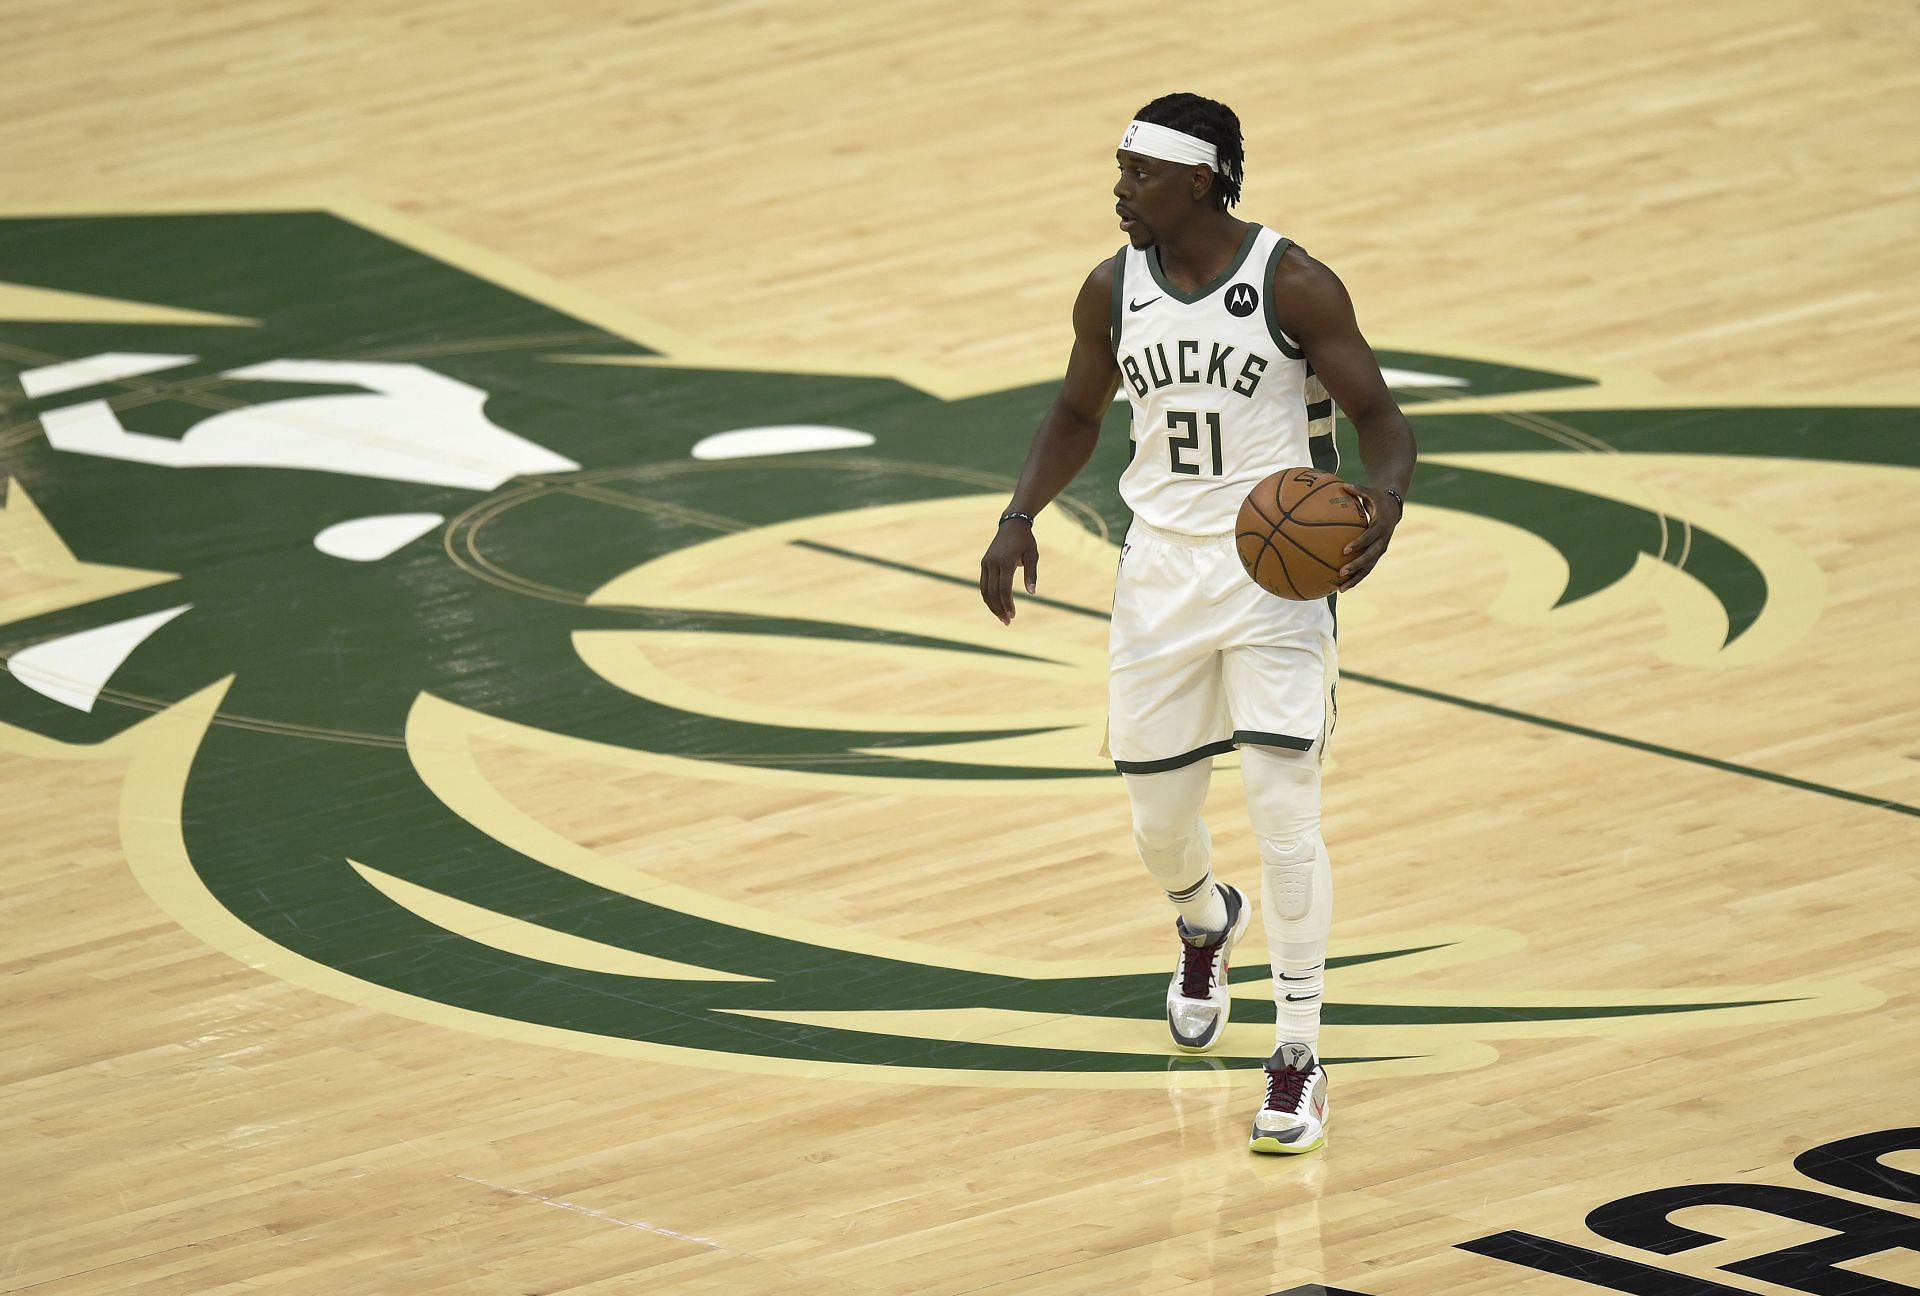 Jrue Holiday #21 of the Milwaukee Bucks brings the ball up court against the Atlanta Hawks during the first half in game two of the Eastern Conference Finals at Fiserv Forum on June 25, 2021 in Milwaukee, Wisconsin.